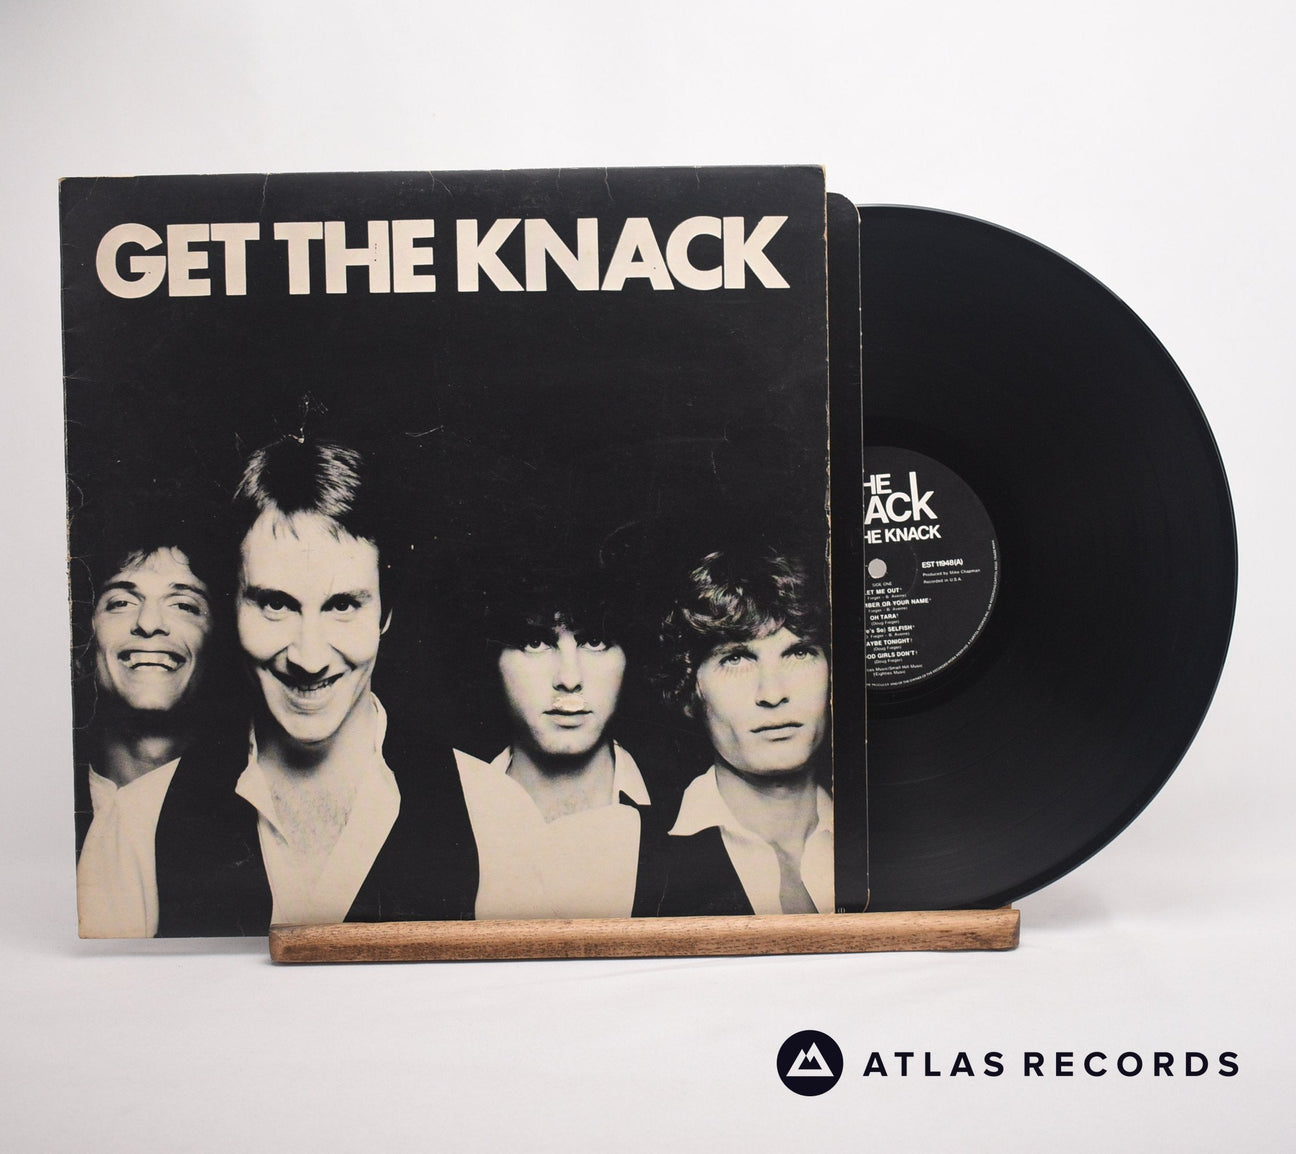 The Knack Get The Knack LP Vinyl Record - Front Cover & Record